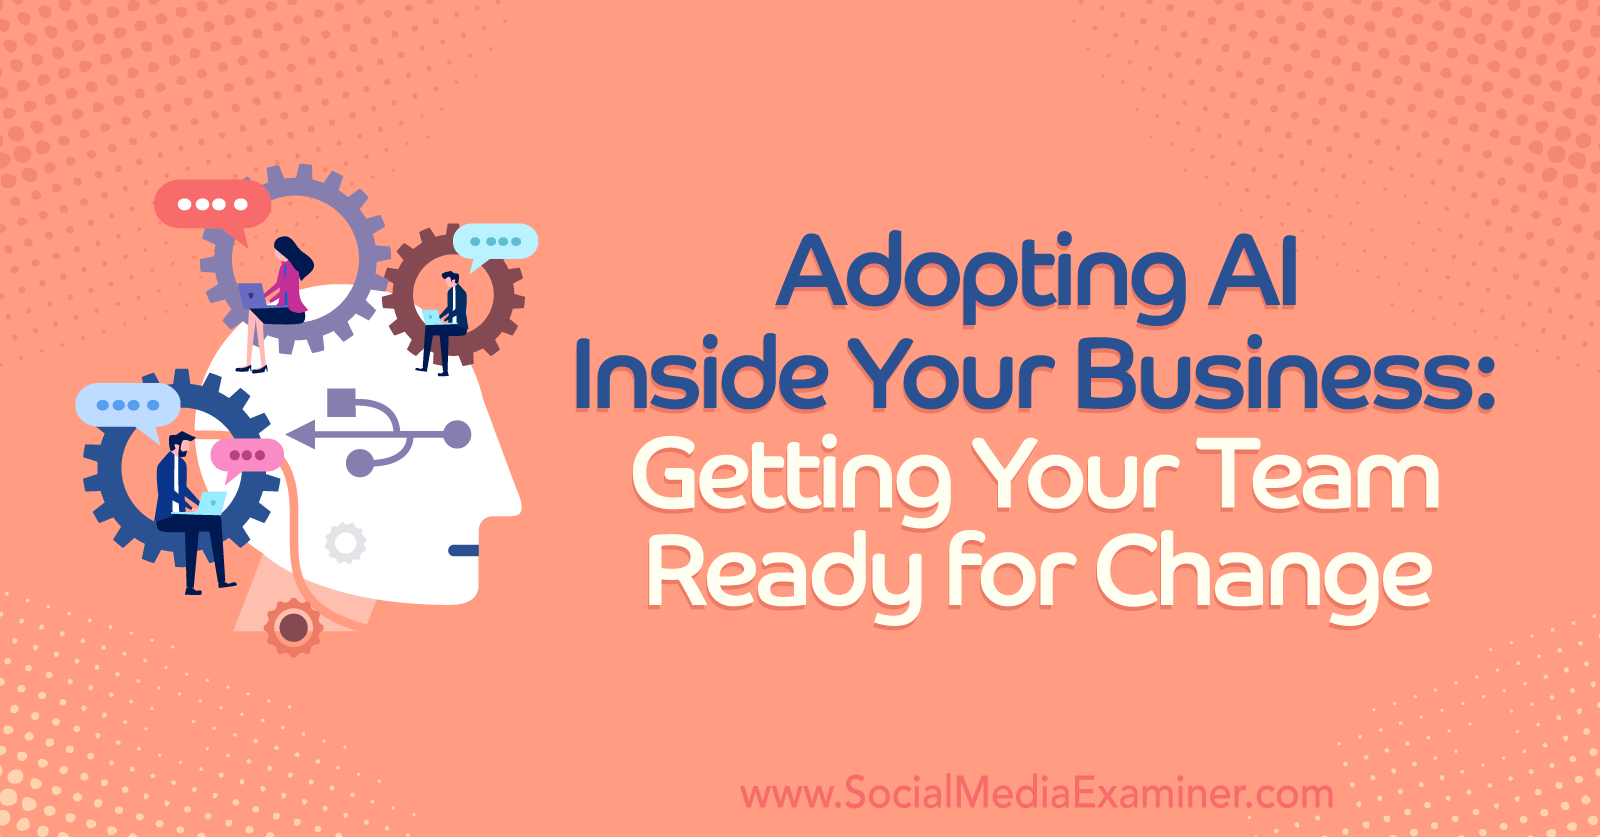 Adopting AI Inside Your Business: Getting Your Team Ready for Change by Social Media Examiner